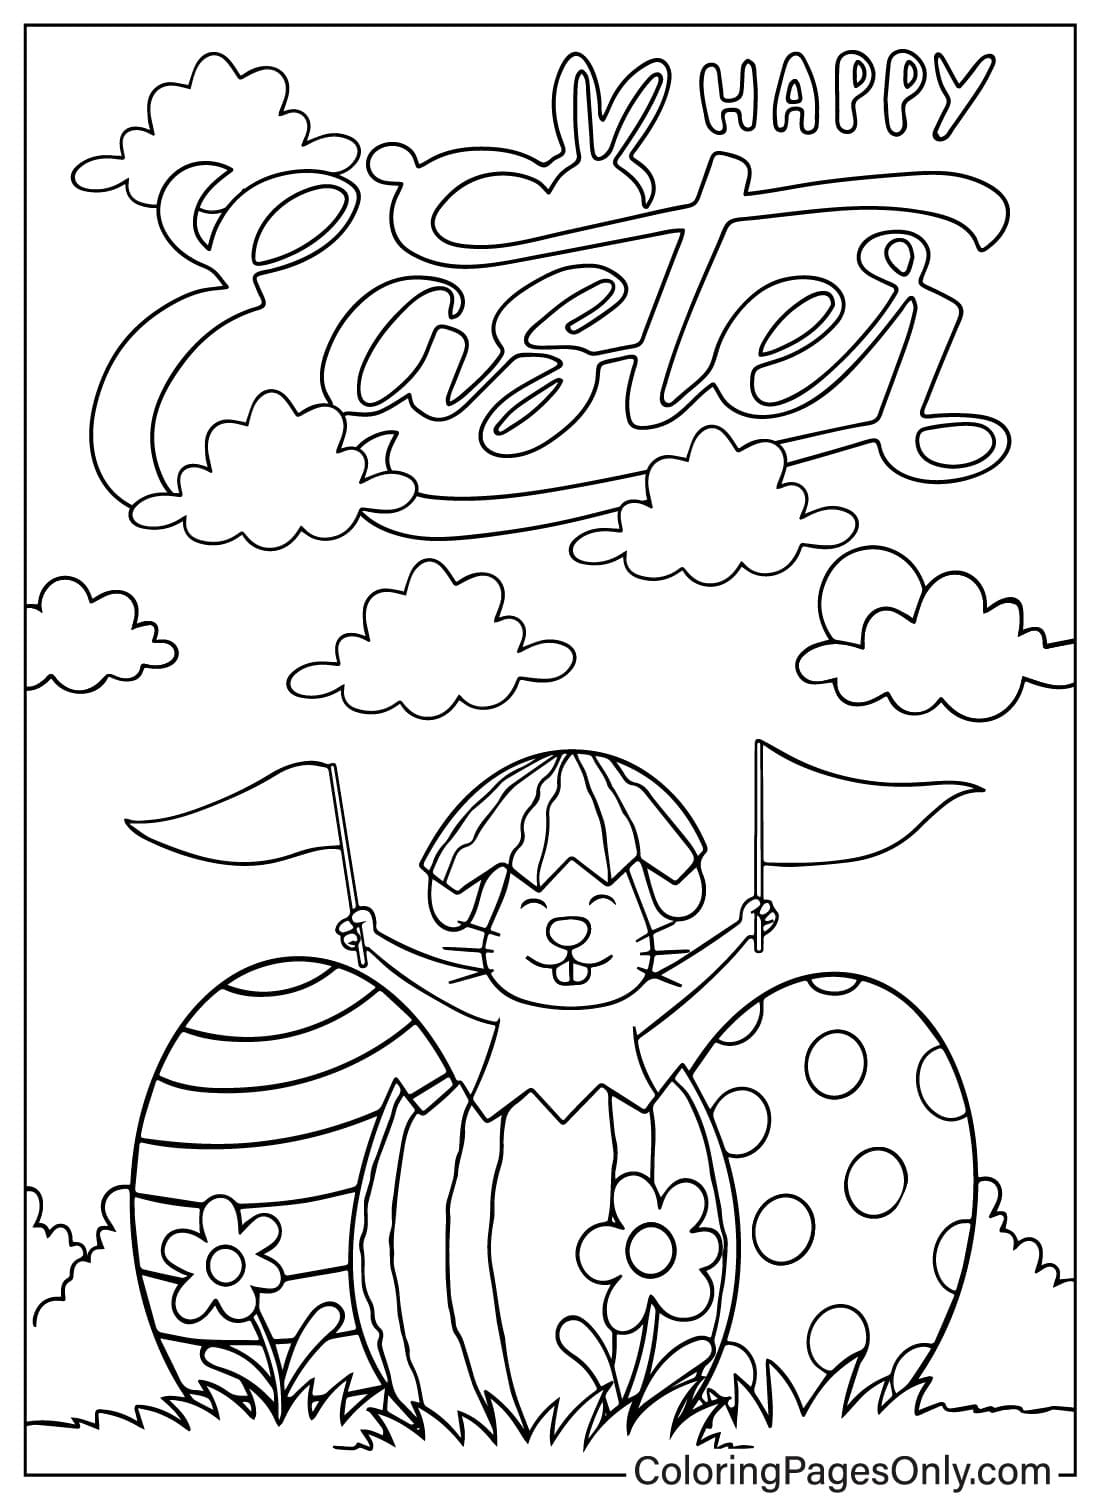 Easter Eggs and Bunny Coloring Page